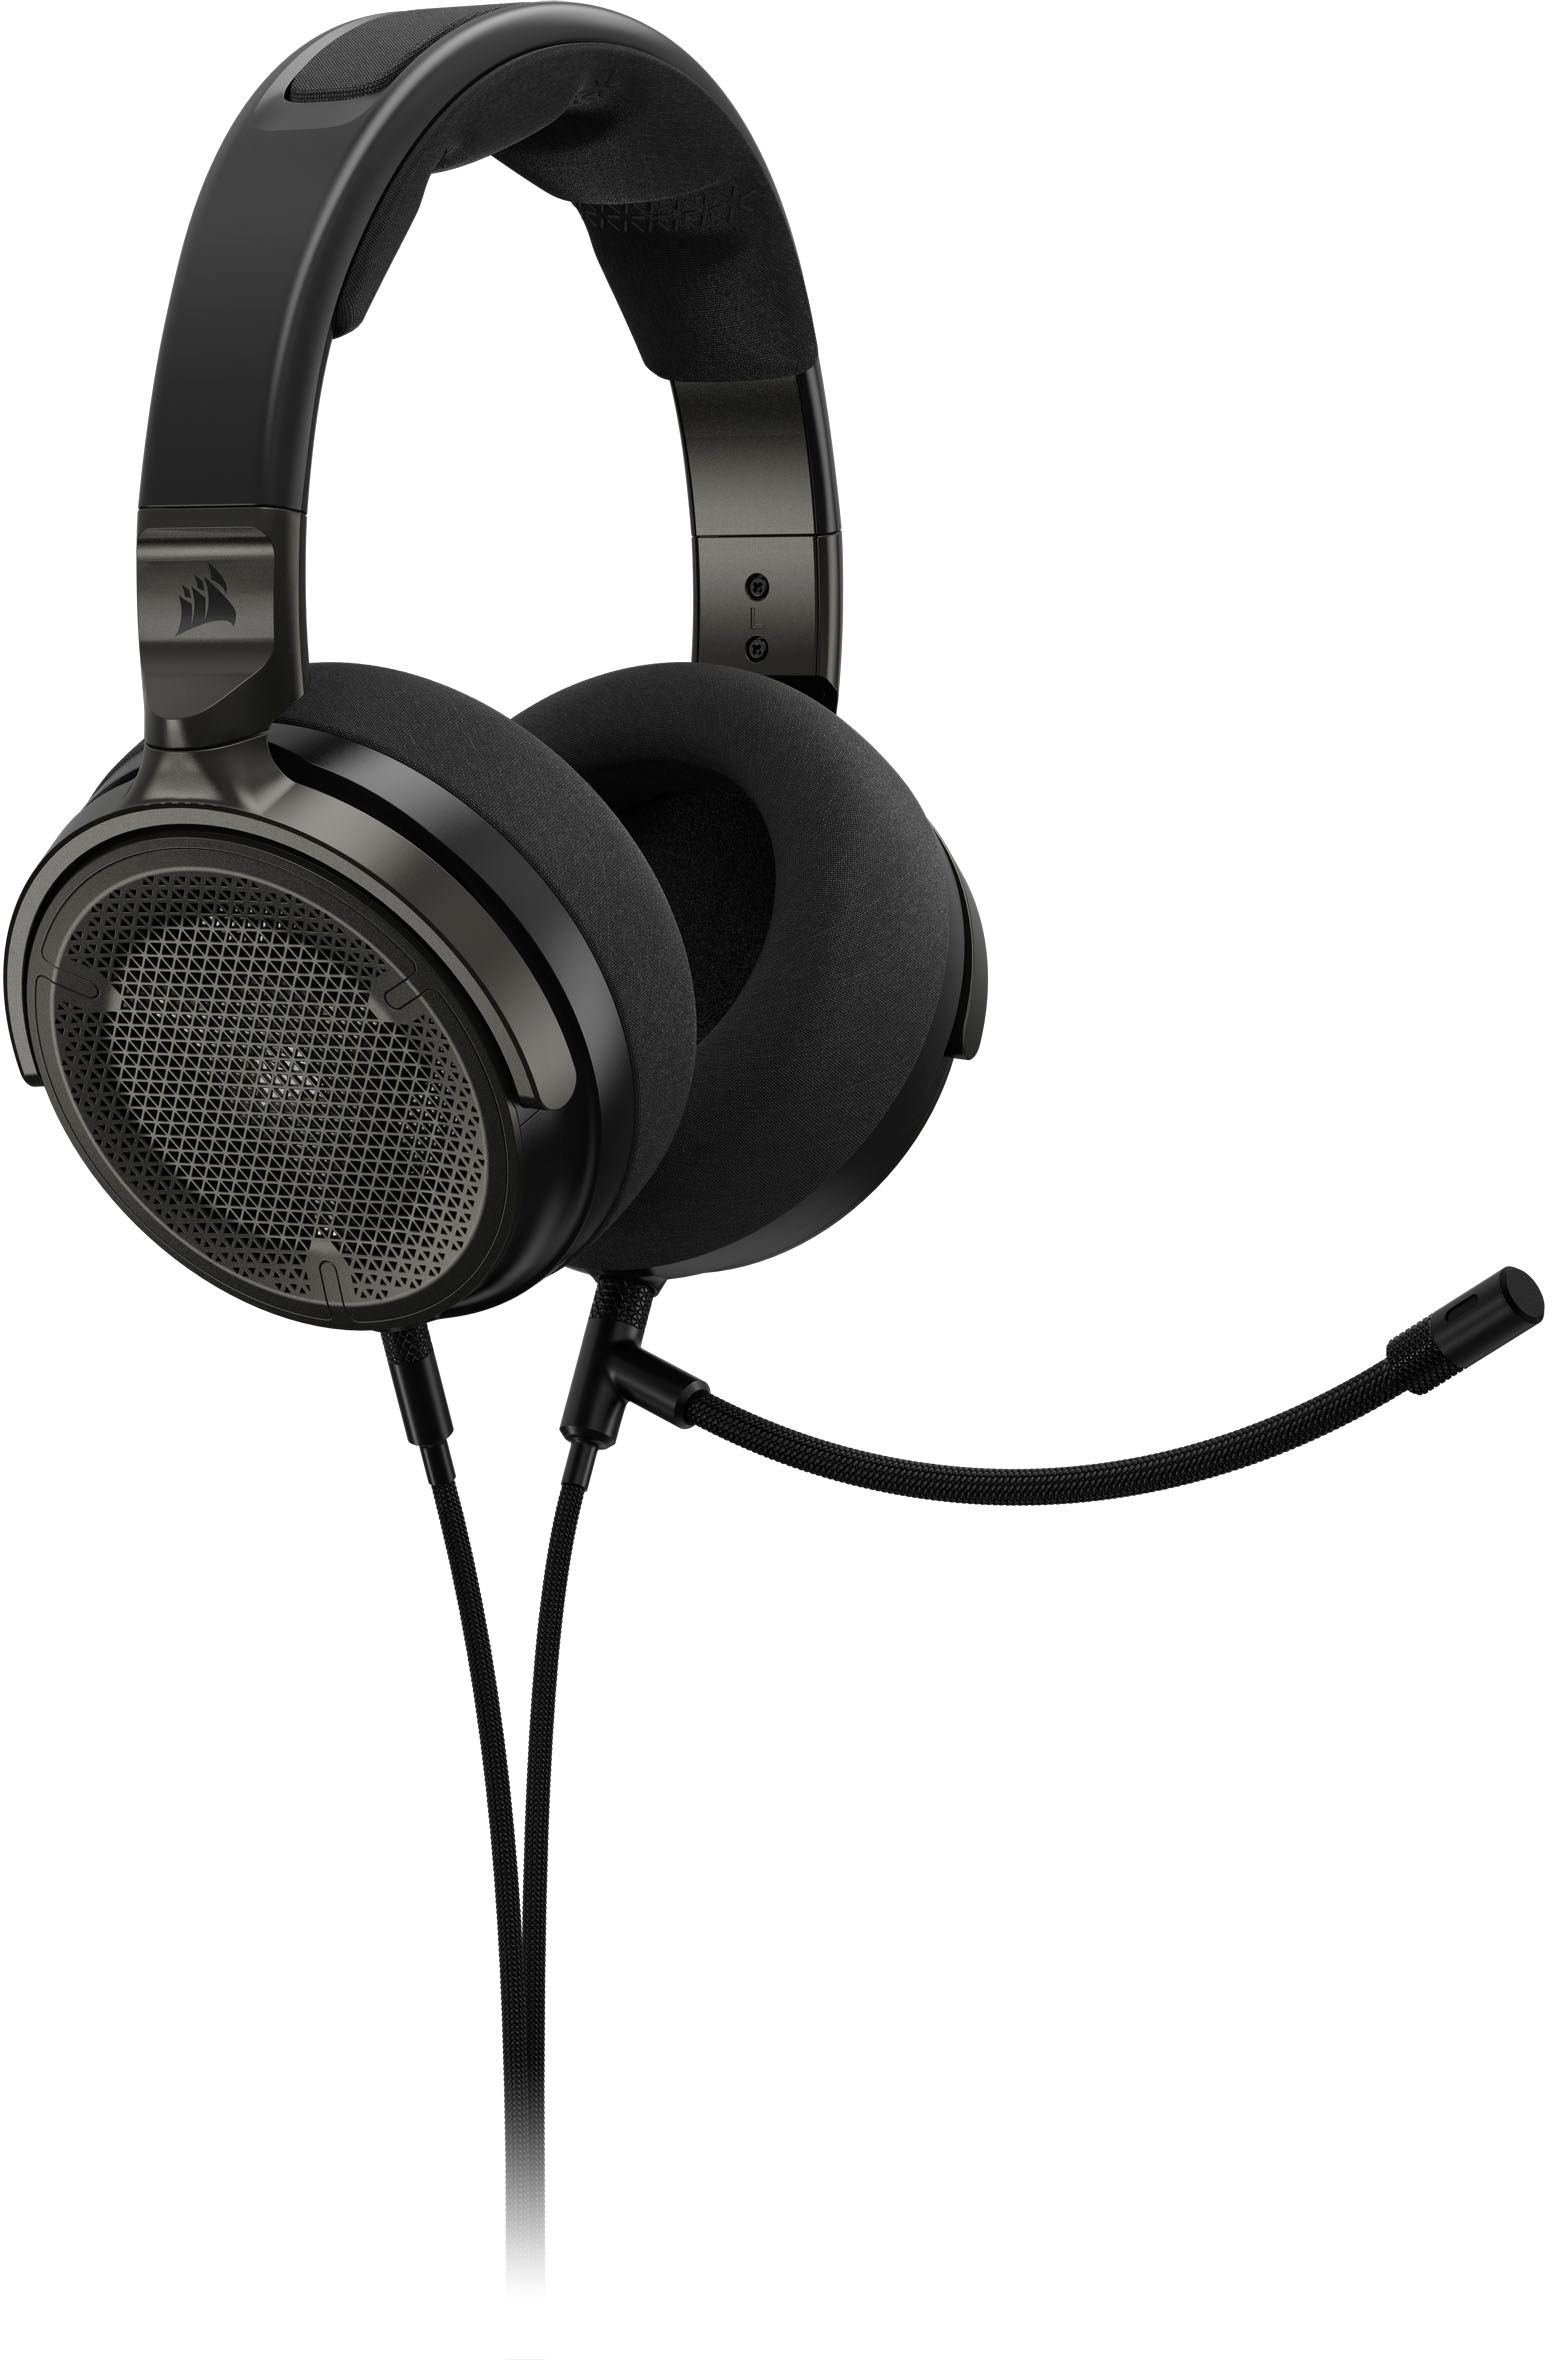 Angle View: CORSAIR - VIRTUOSO PRO Wired Open Back Streaming/Gaming Headset - Carbon